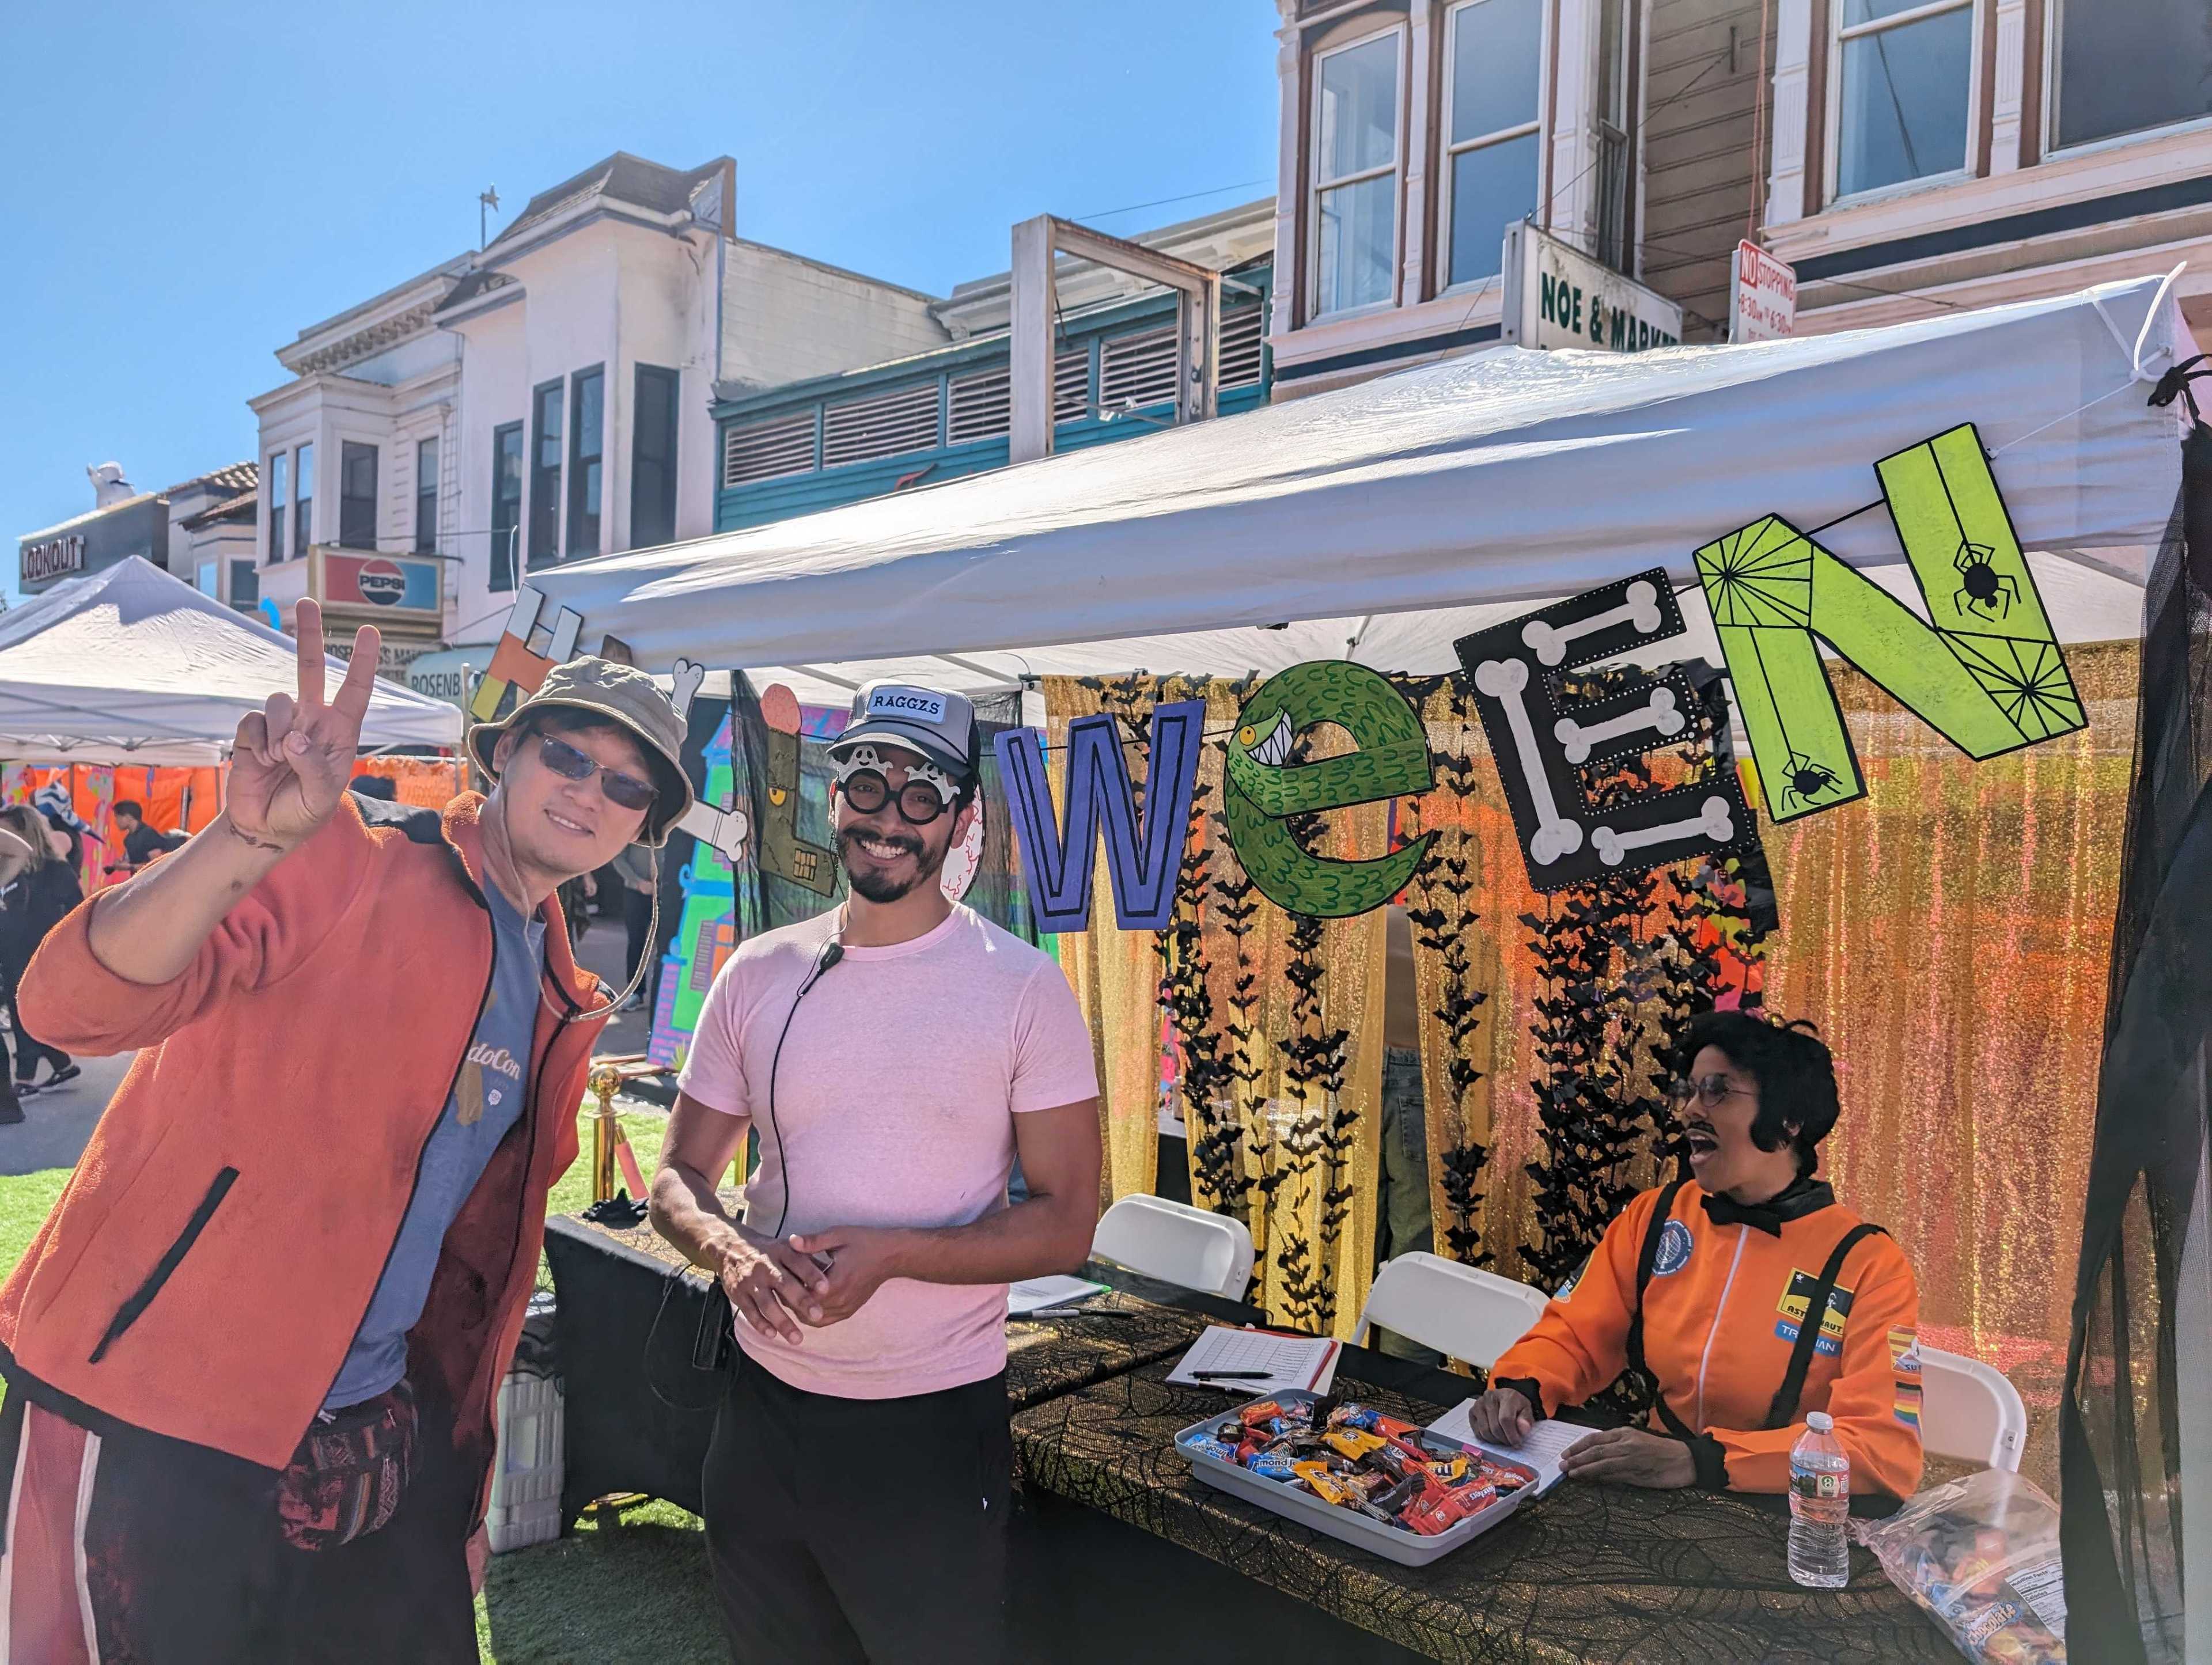 Halloween block party co-organizer Lauro Gonzalez, center, helped keep events on time and on schedule with help from booth workers and friends.